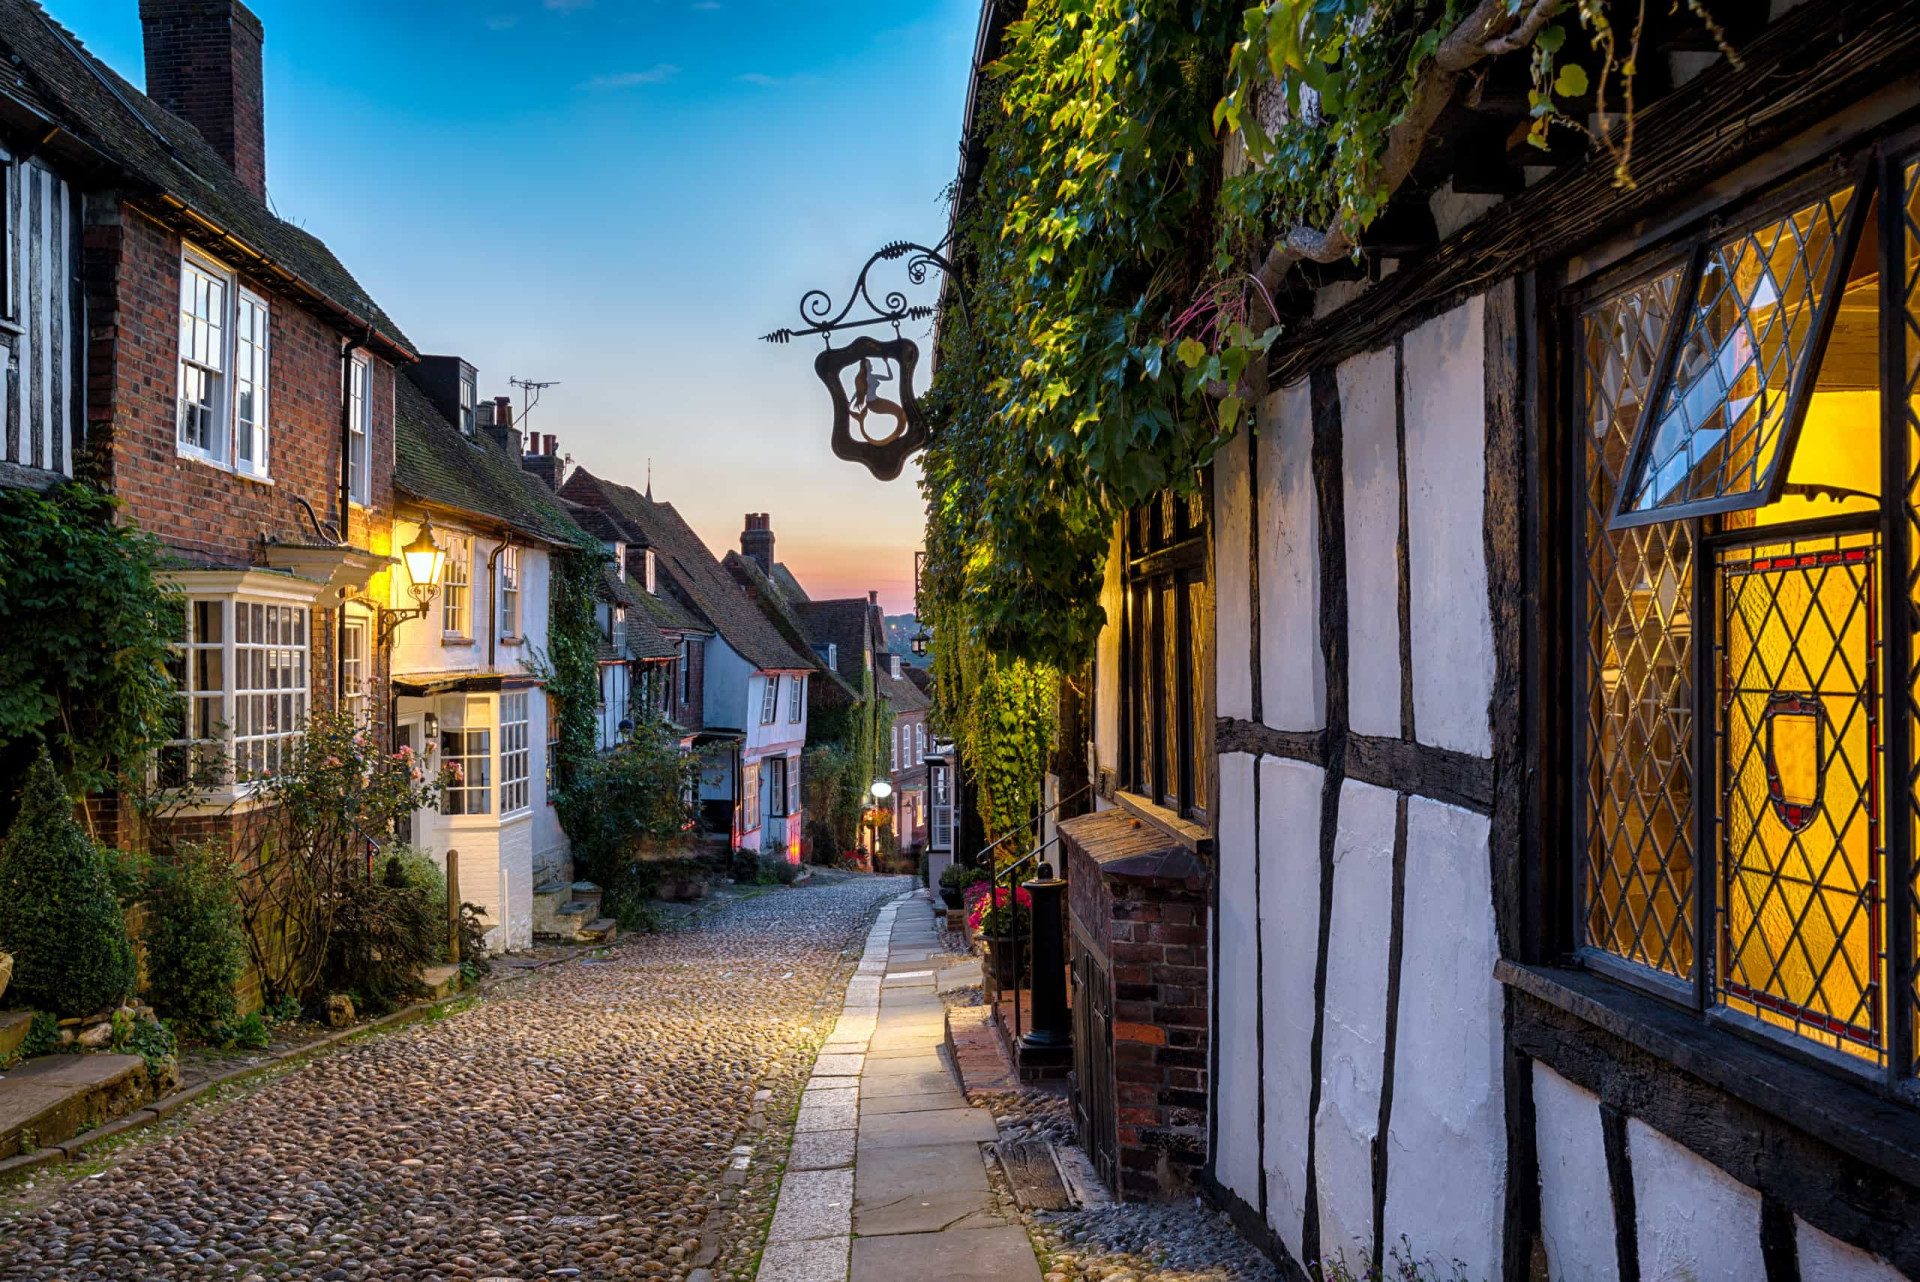 <p>Rye in East Sussex is a great little town with beautiful 15th-century buildings with special dark wood framing. On a quaint weekend away, you can go exploring its adorable alleyways and go shopping in its well-known vintage shops.</p>